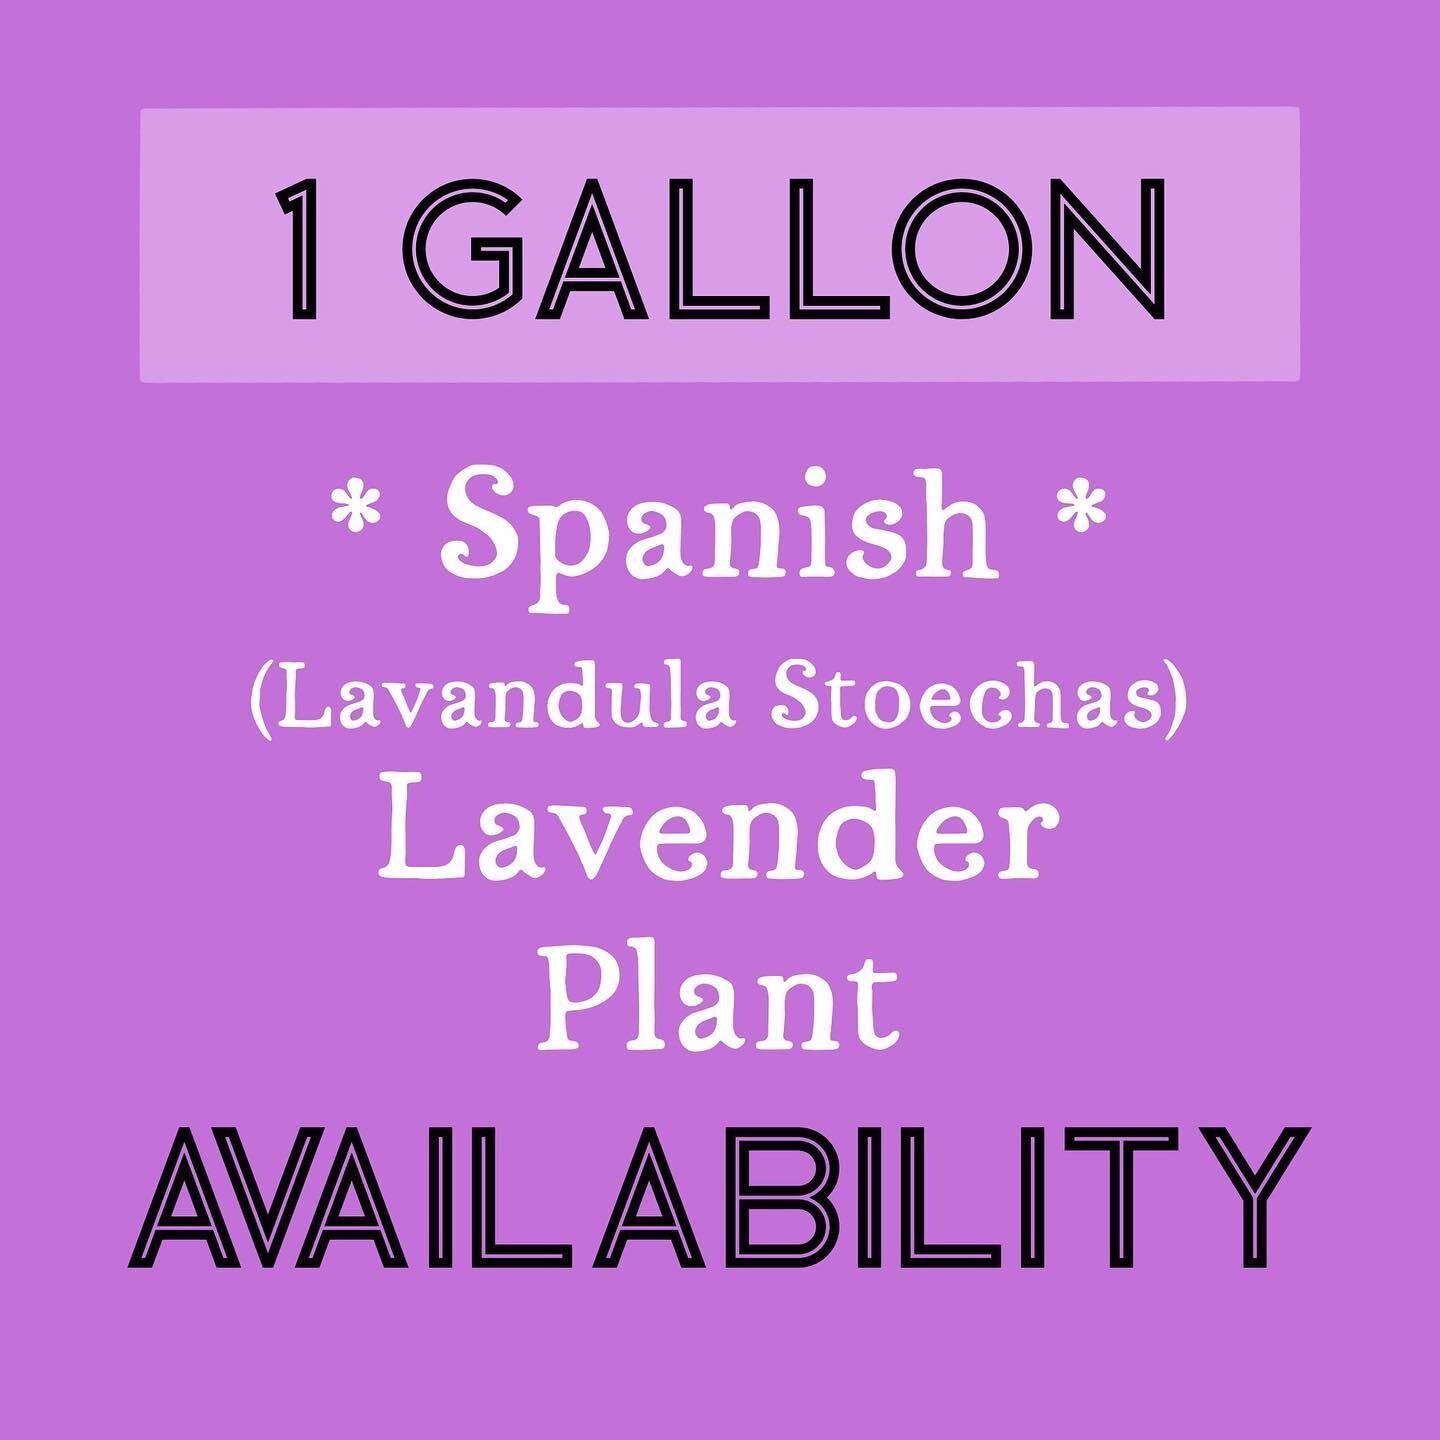 🌸1 GALLON SPANISH🌸
Lavenders available at the Camas Plant &amp; Garden Fair!
We also have 2 gallon as well as 4 inch Spanish lavender coming to the plant fair too!
Prices will be at the sale!
✨Saturday May 13
🌸9am-4pm
🌿Downtown Camas
#lacamaslave